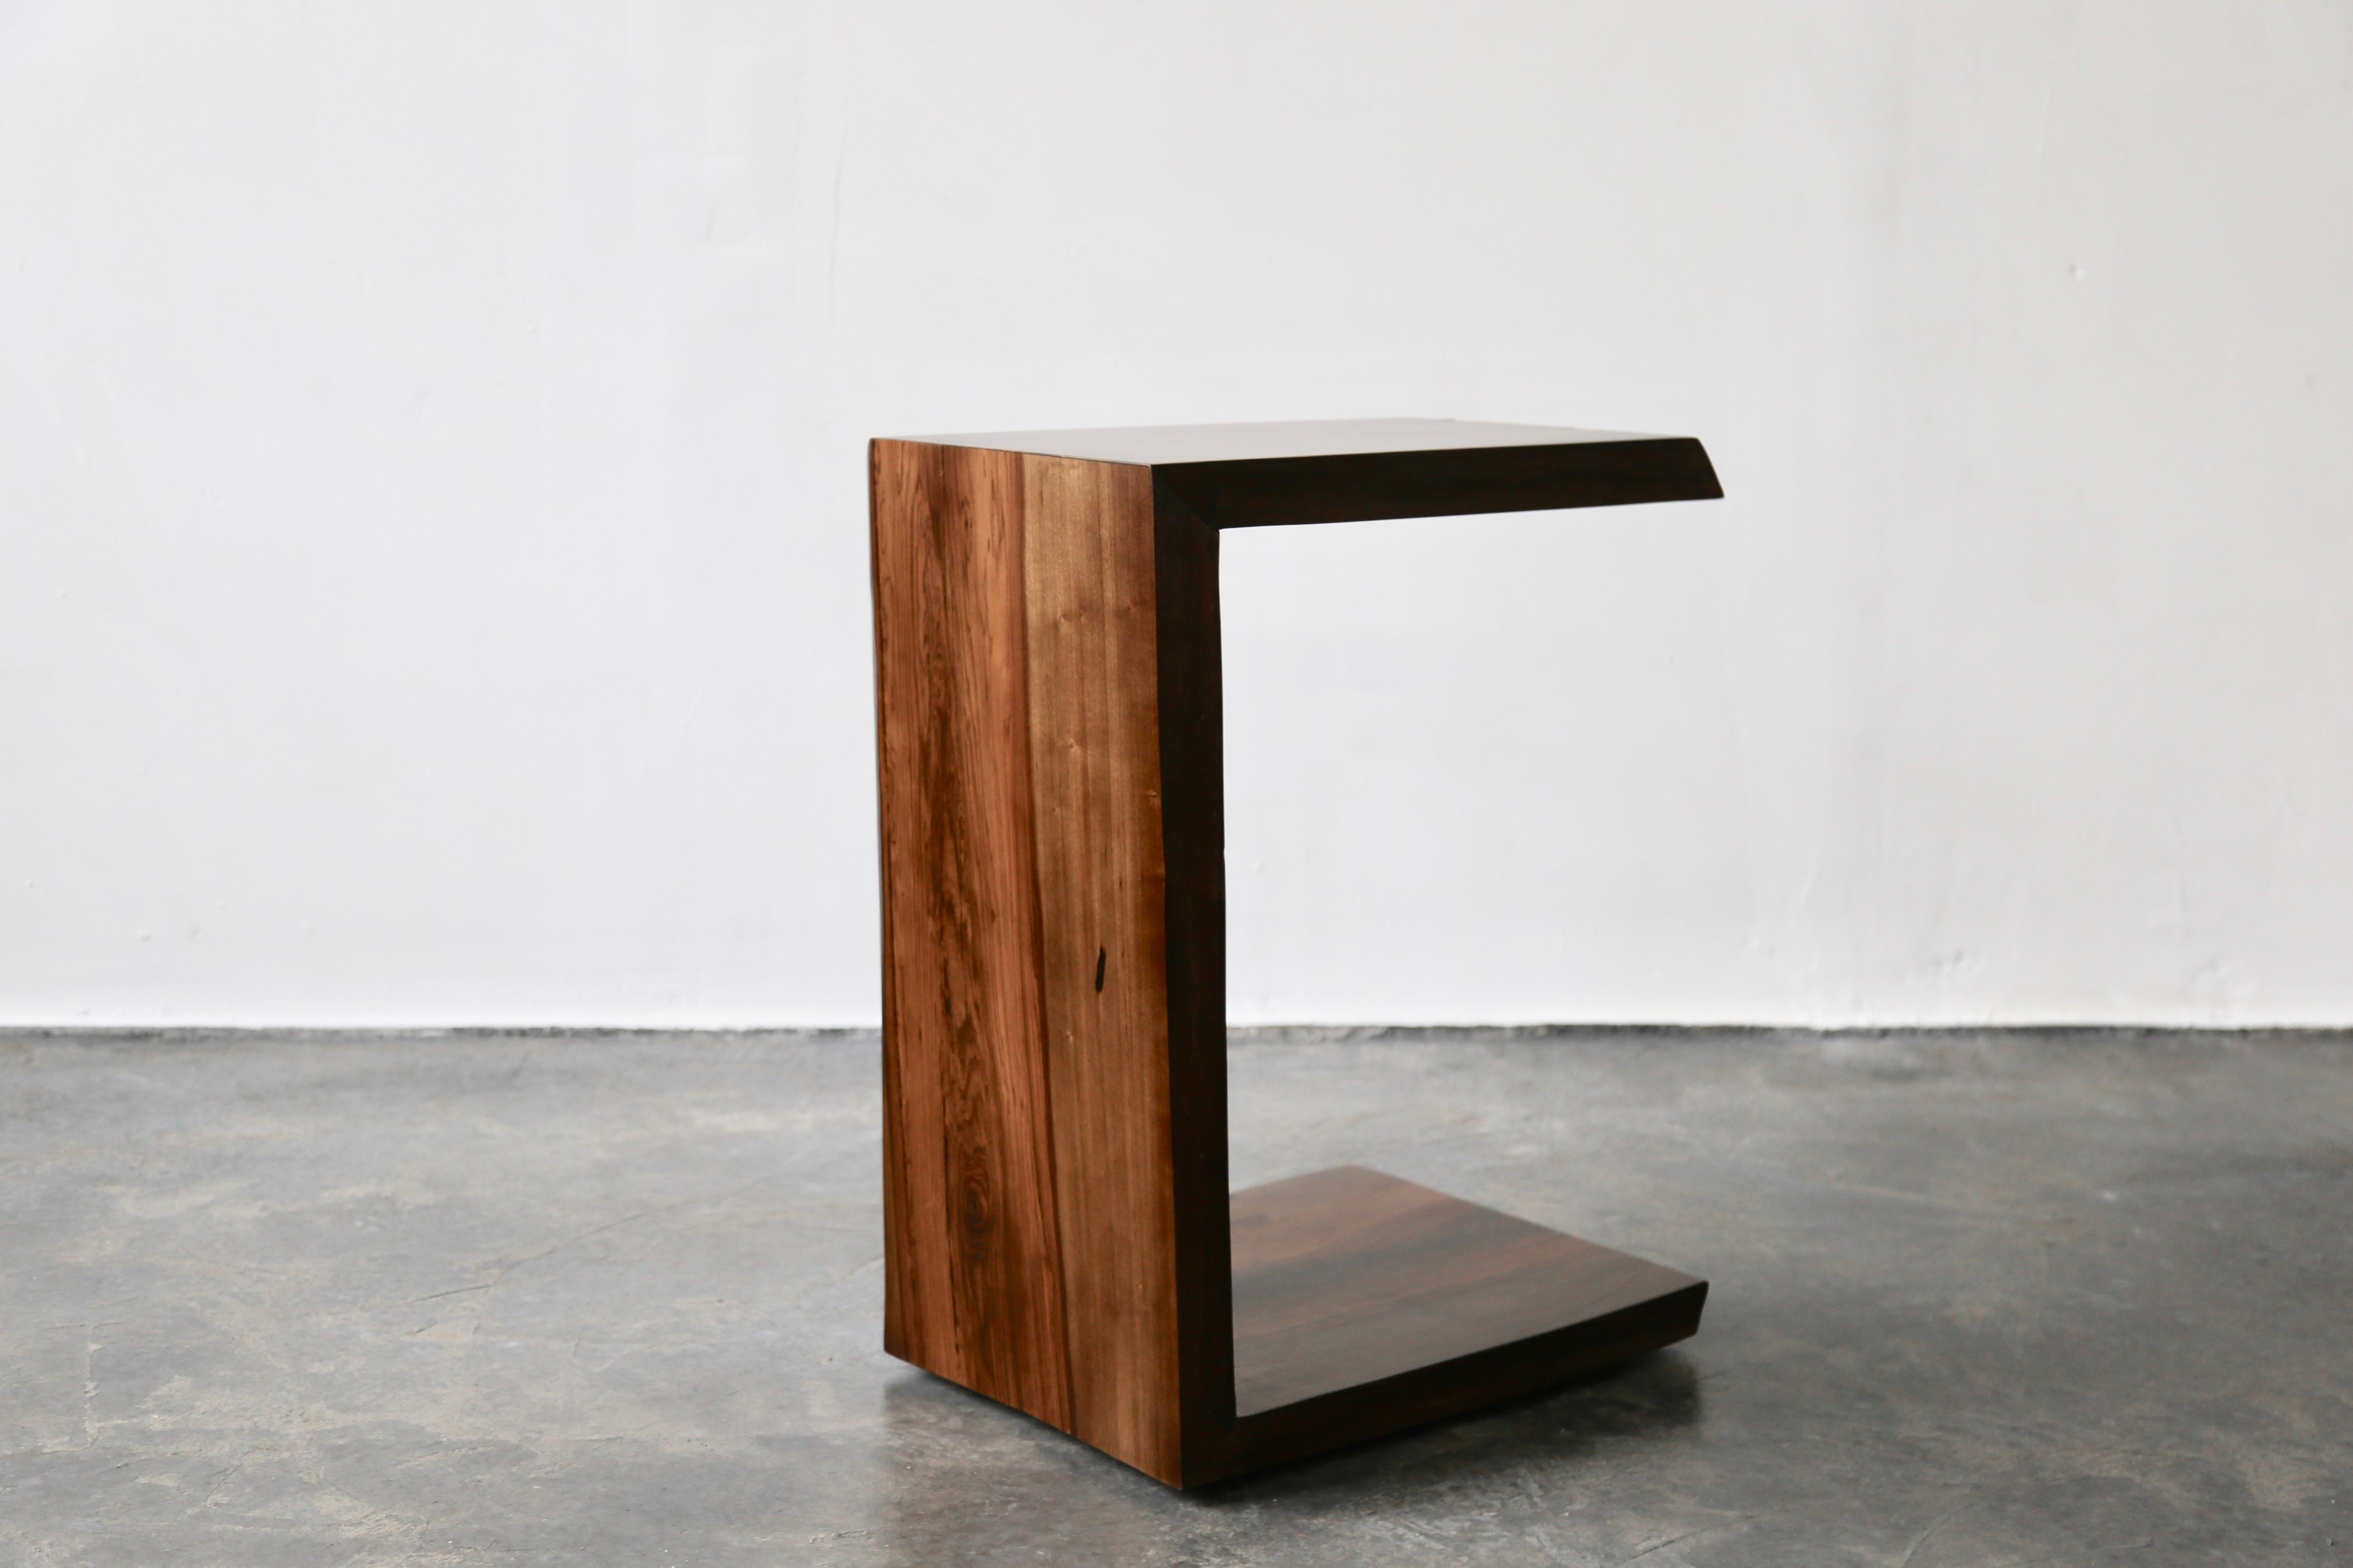 The Carlo table is a cantilevered occasional table, designed to slide under a sofa or sitting area as necessary, and fashioned from slabs of sustainable sourced solid Argentine rosewood. Shown here in a natural finish, it is customizable to your